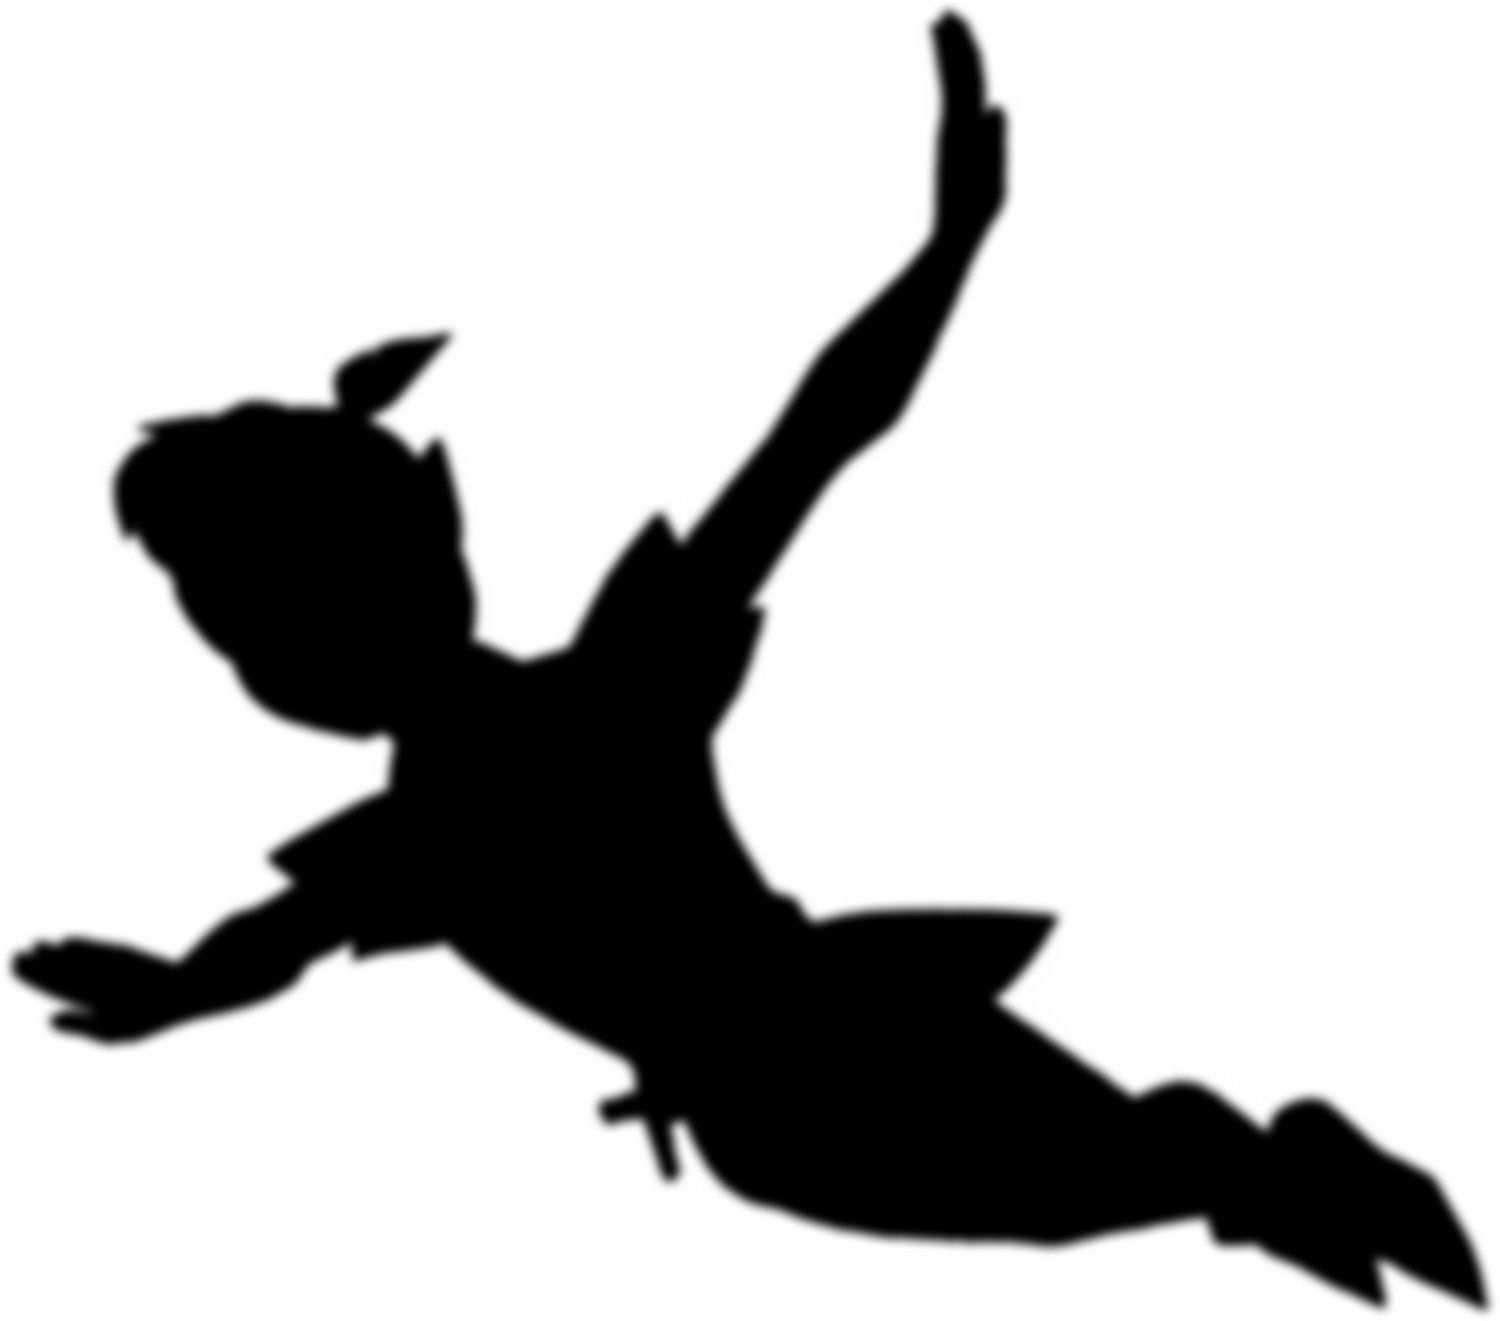 Cast List For Peter Pan Peter Pan Silhouette Disney Silhouettes Disney Silhouette